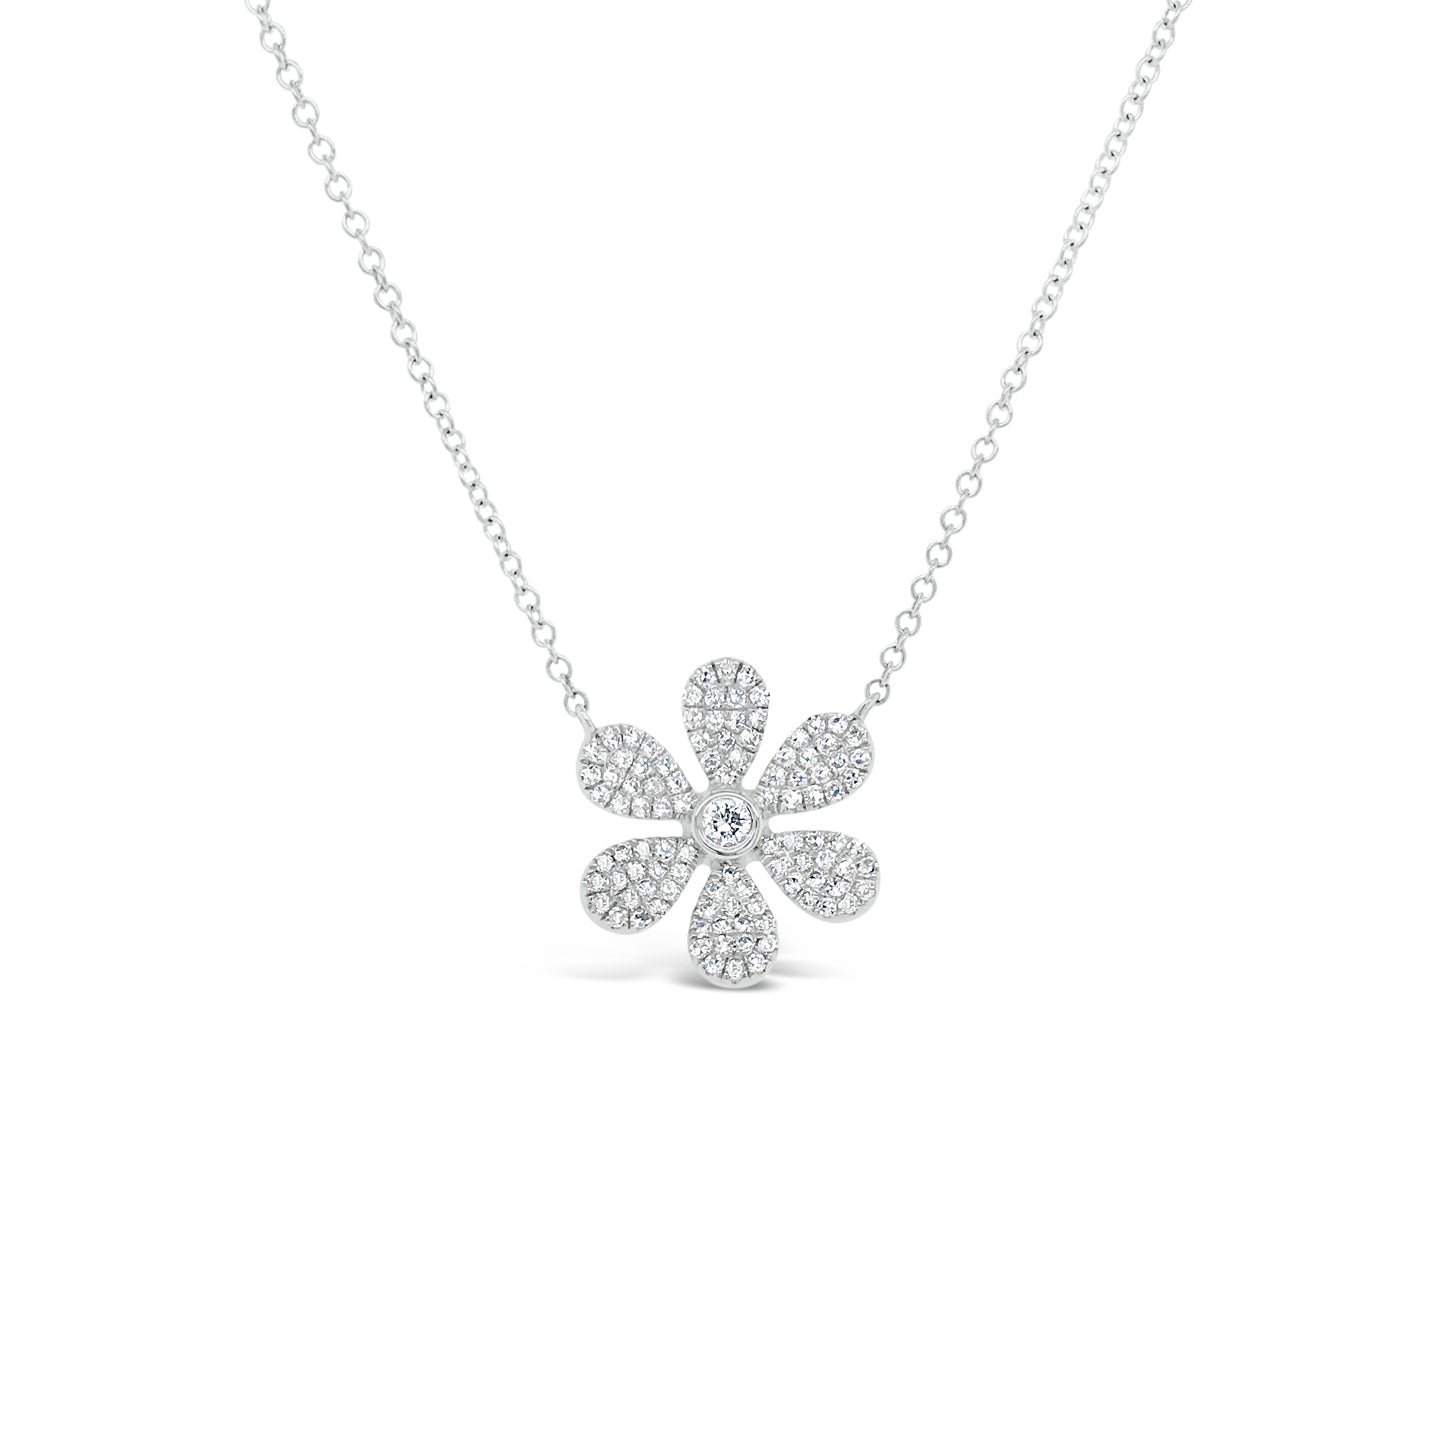 Pave Diamond Daisy Pendant Necklace  -14K gold weighing 2.42 grams  -103 round pave-set diamonds totaling 0.32 carats